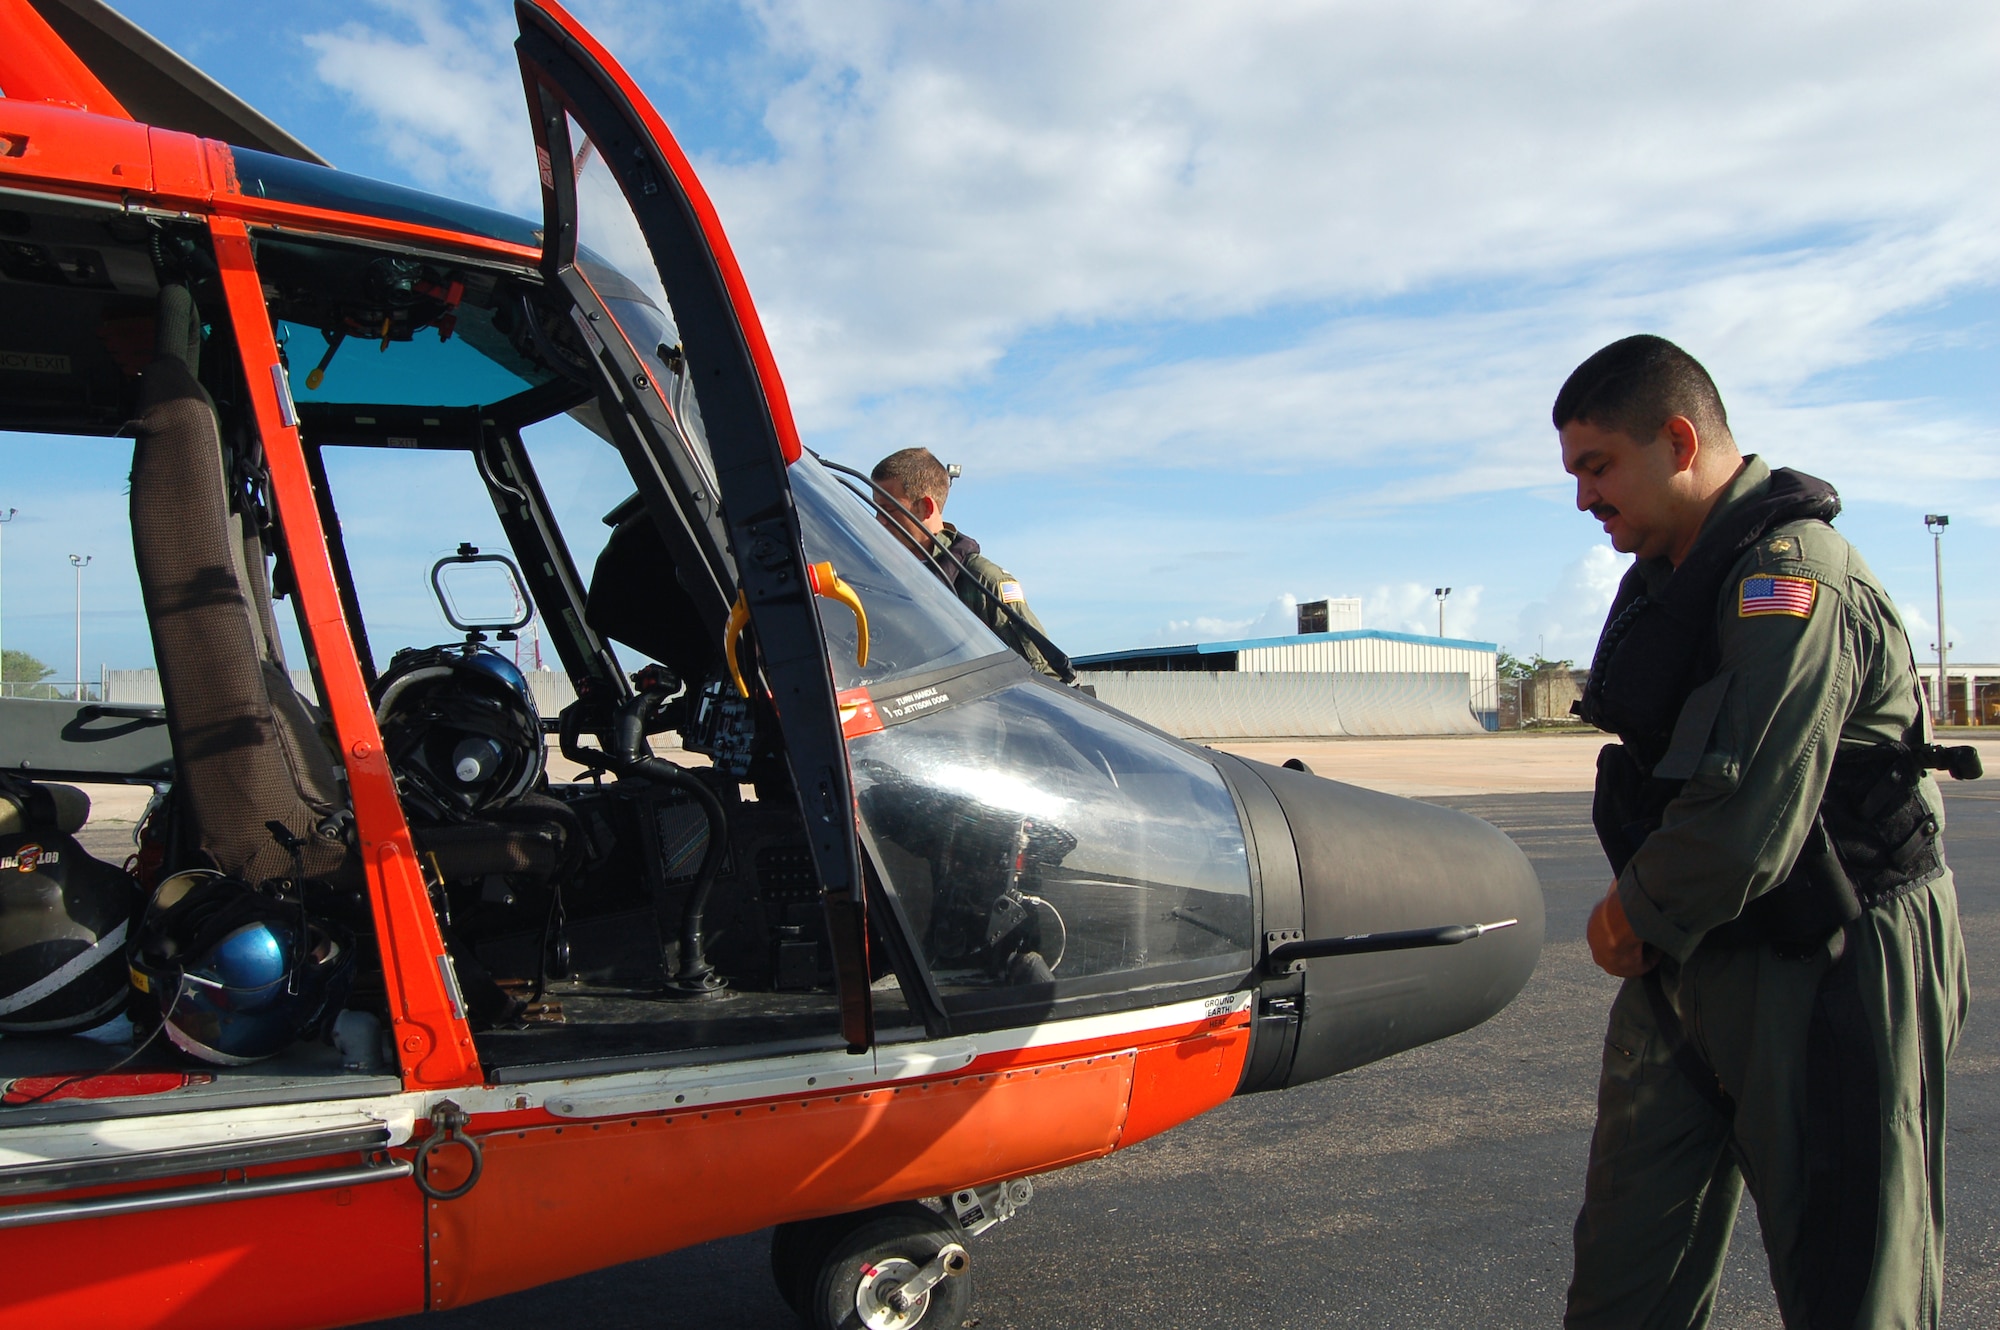 Coast Guard Lt. Cmdr. Juan Lopez does a preflight inspection on an HH-65C Dolphin prior to taking off on a training mission March 21 at Coast Guard Air Station Borinquen, Puerto Rico. The Coast Guard works with the Puerto Rican Police Department and helps them train on how to dive out from a helicopter to rescue people at sea. A former Senior Airman, Commander Lopez is an aircraft commander and the assistant operations officer at the air station. The Coast Guard provides a search and rescue capability for 1.2 million square miles around the Caribbean. (U.S. Air Force photo/Tech. Sgt. Ben Gonzales)